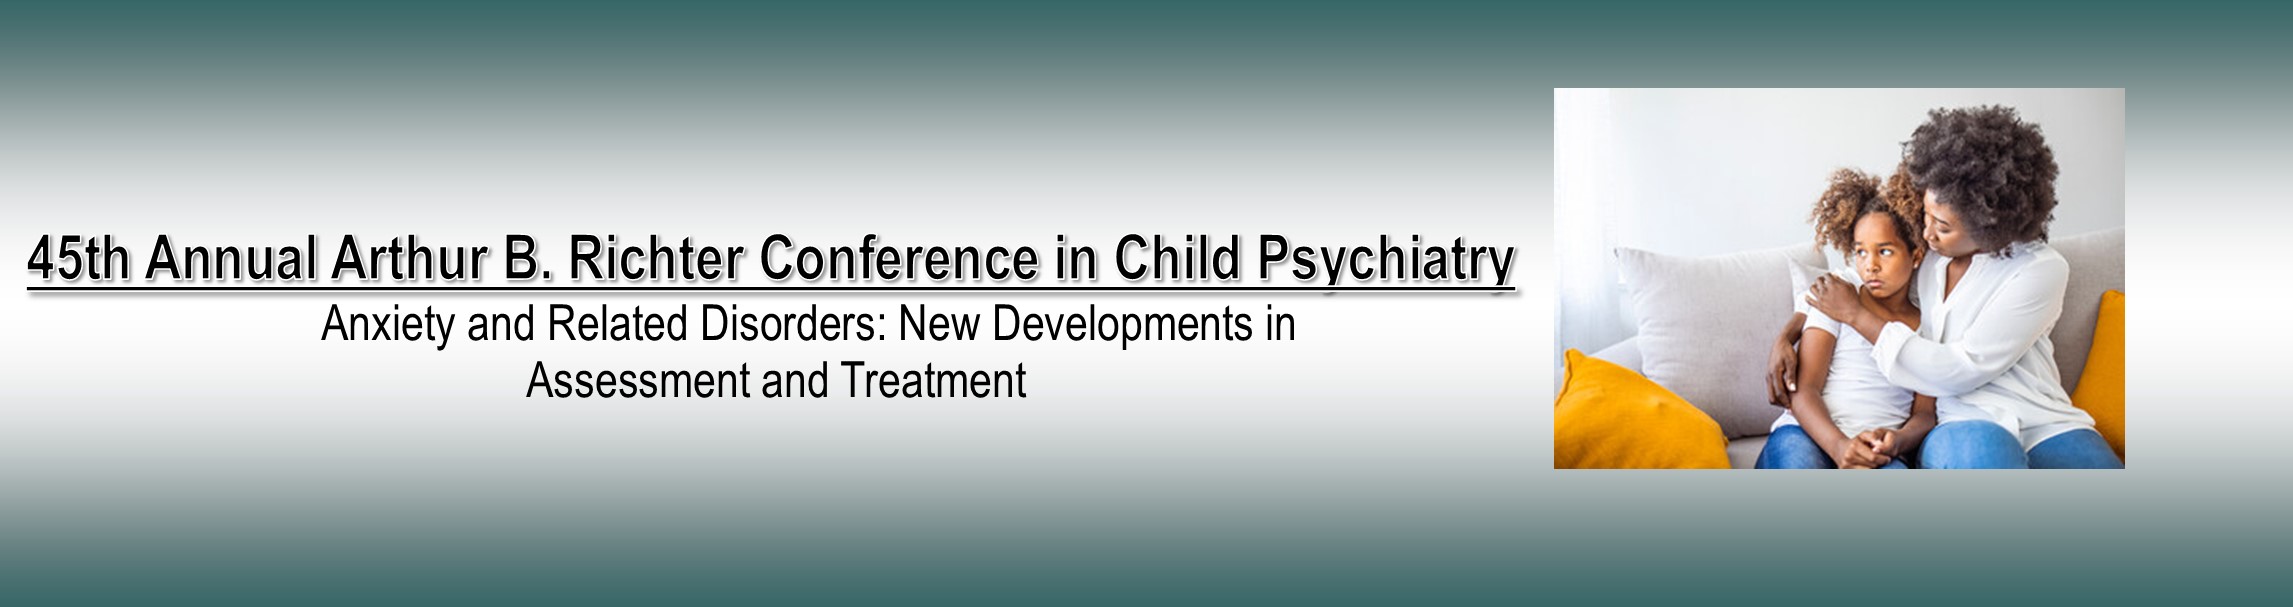 45th Annual Arthur B. Richter Conference in Child Psychiatry Banner